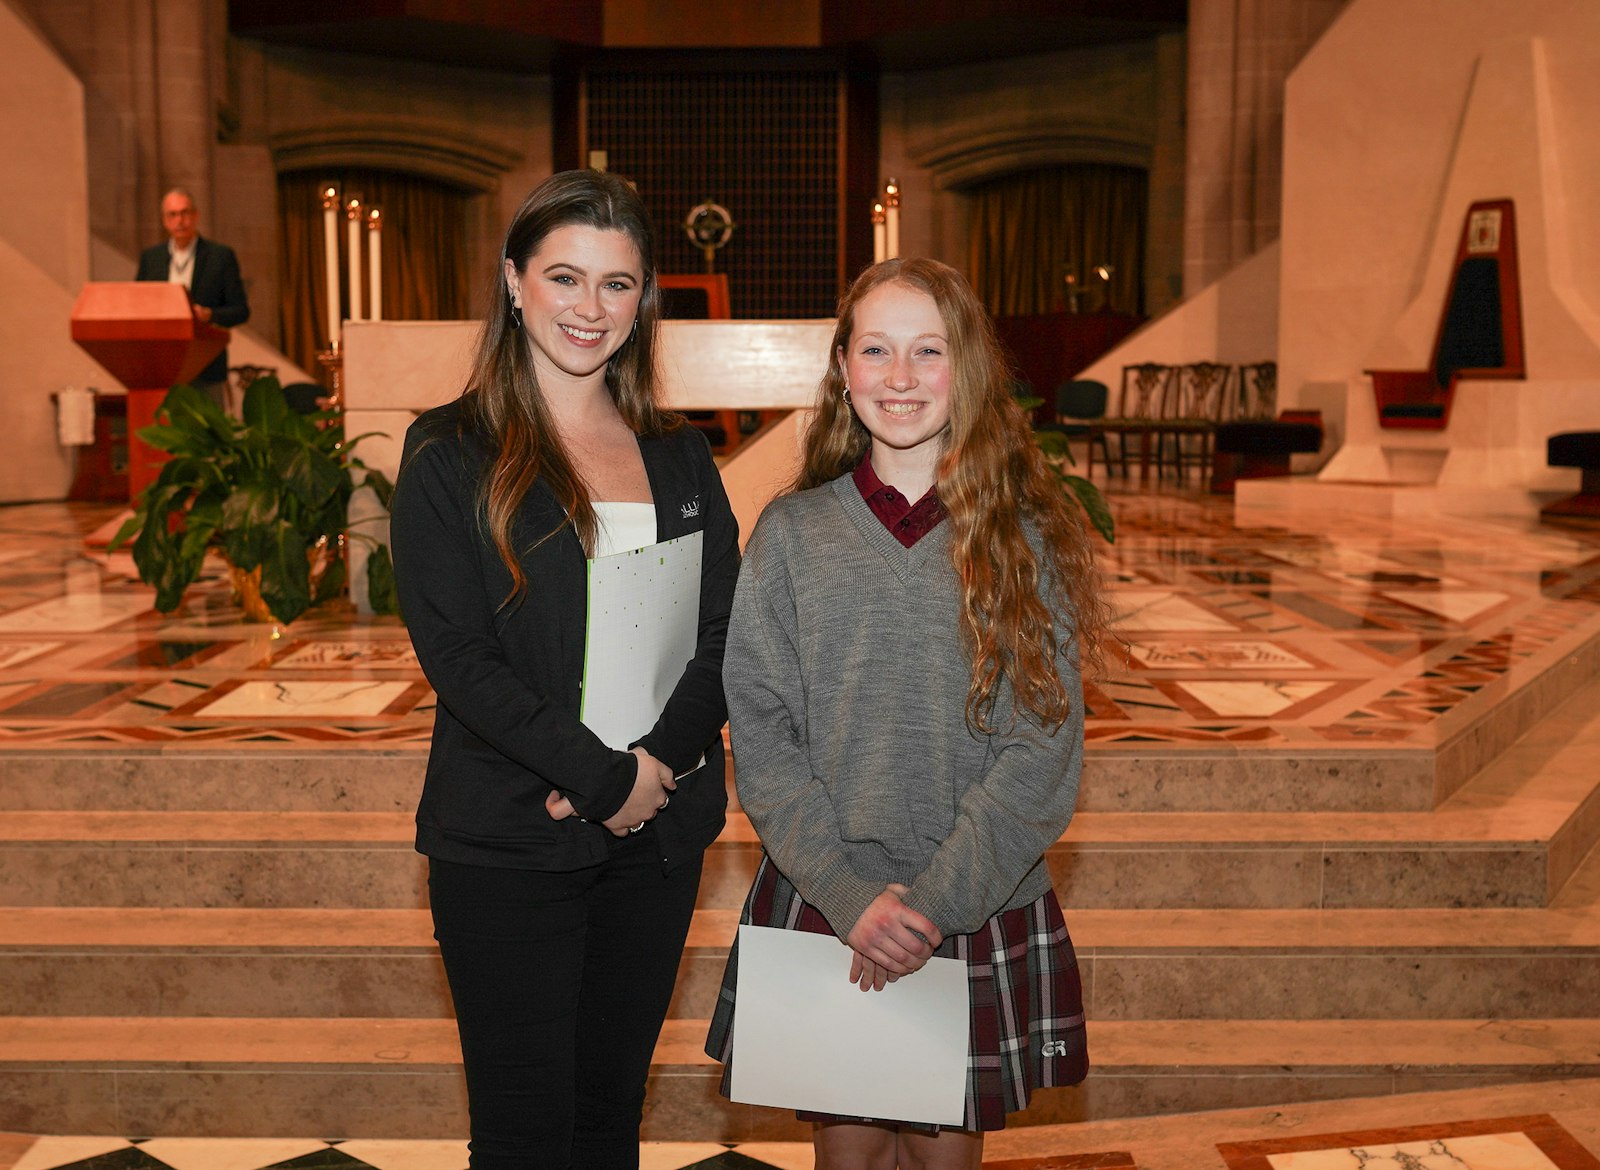 Genevieve Campbell, right, a freshman at Gabriel Richard High School in Riverview, receives her first-place award from Jessica Rabine, communications coordinator for Alliance Catholic Credit Union. Campbell's winning apparel design depicted the Holy Trinity, with different levels of fire representing different characteristics of the Divine Persons of the Trinity.